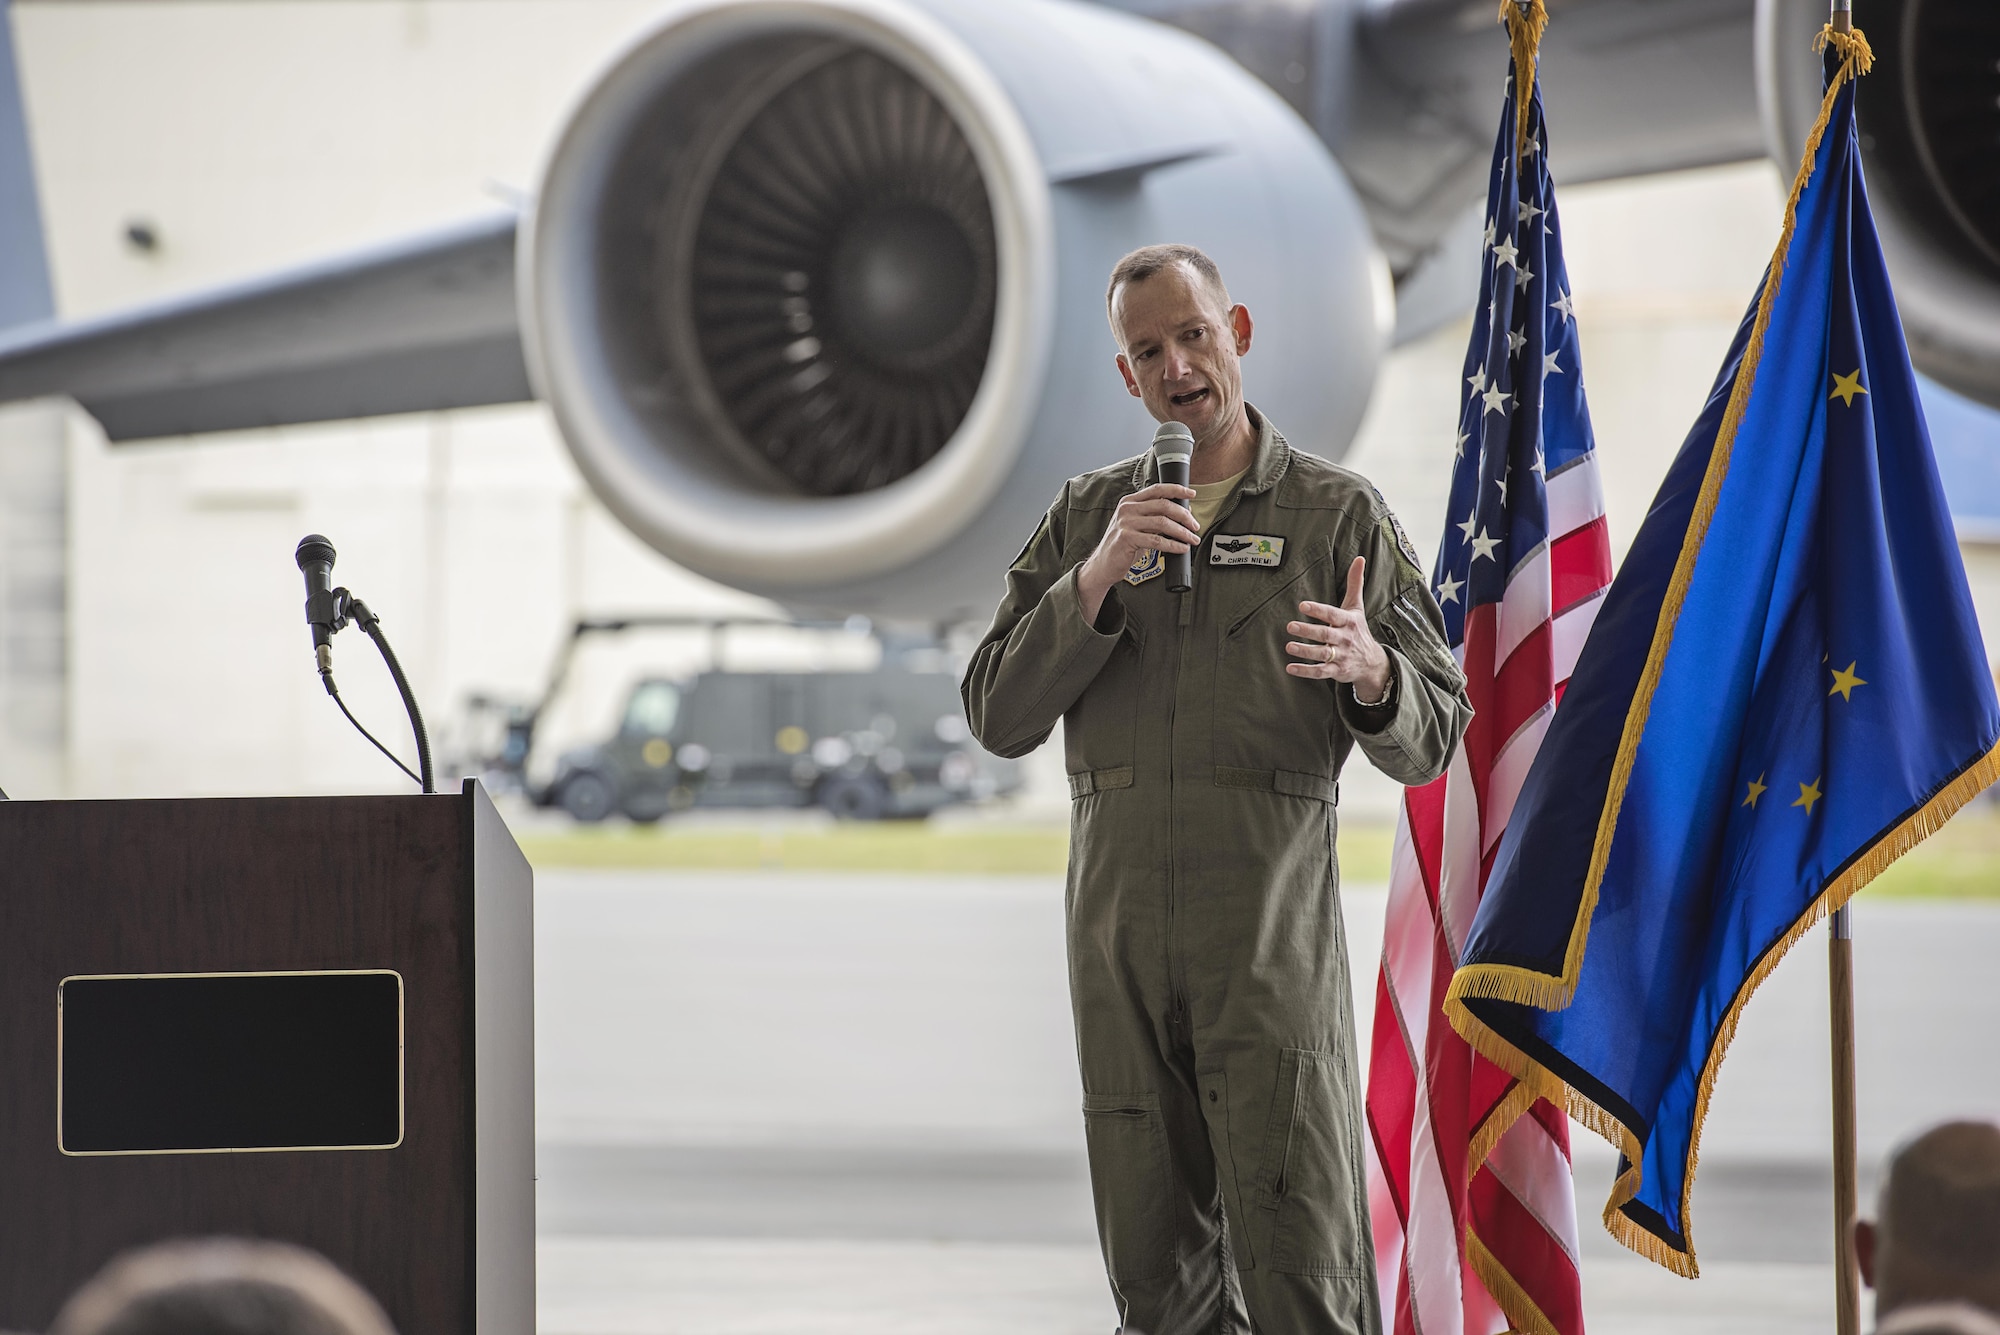 Col. Steven deMilliano, commander of the 176th Wing, Alaska Air National Guard, and Col. Christopher Niemi, commander of the 3rd Wing, U.S. Air Force, commemorated the change of assignment of eight C-17 Globe Master III aircraft based here during a ceremony on Joint Base Elmendorf-Richardson, Alaska, May 17. The two commanders took turns speaking to Airmen from both Wings about the transfer of the aircraft from active duty to the Guard and how the units will continue to support the C-17 mission together in the arctic and Pacific regions. (U.S. Air National Guard photo by Staff Sgt. Edward Eagerton/released)